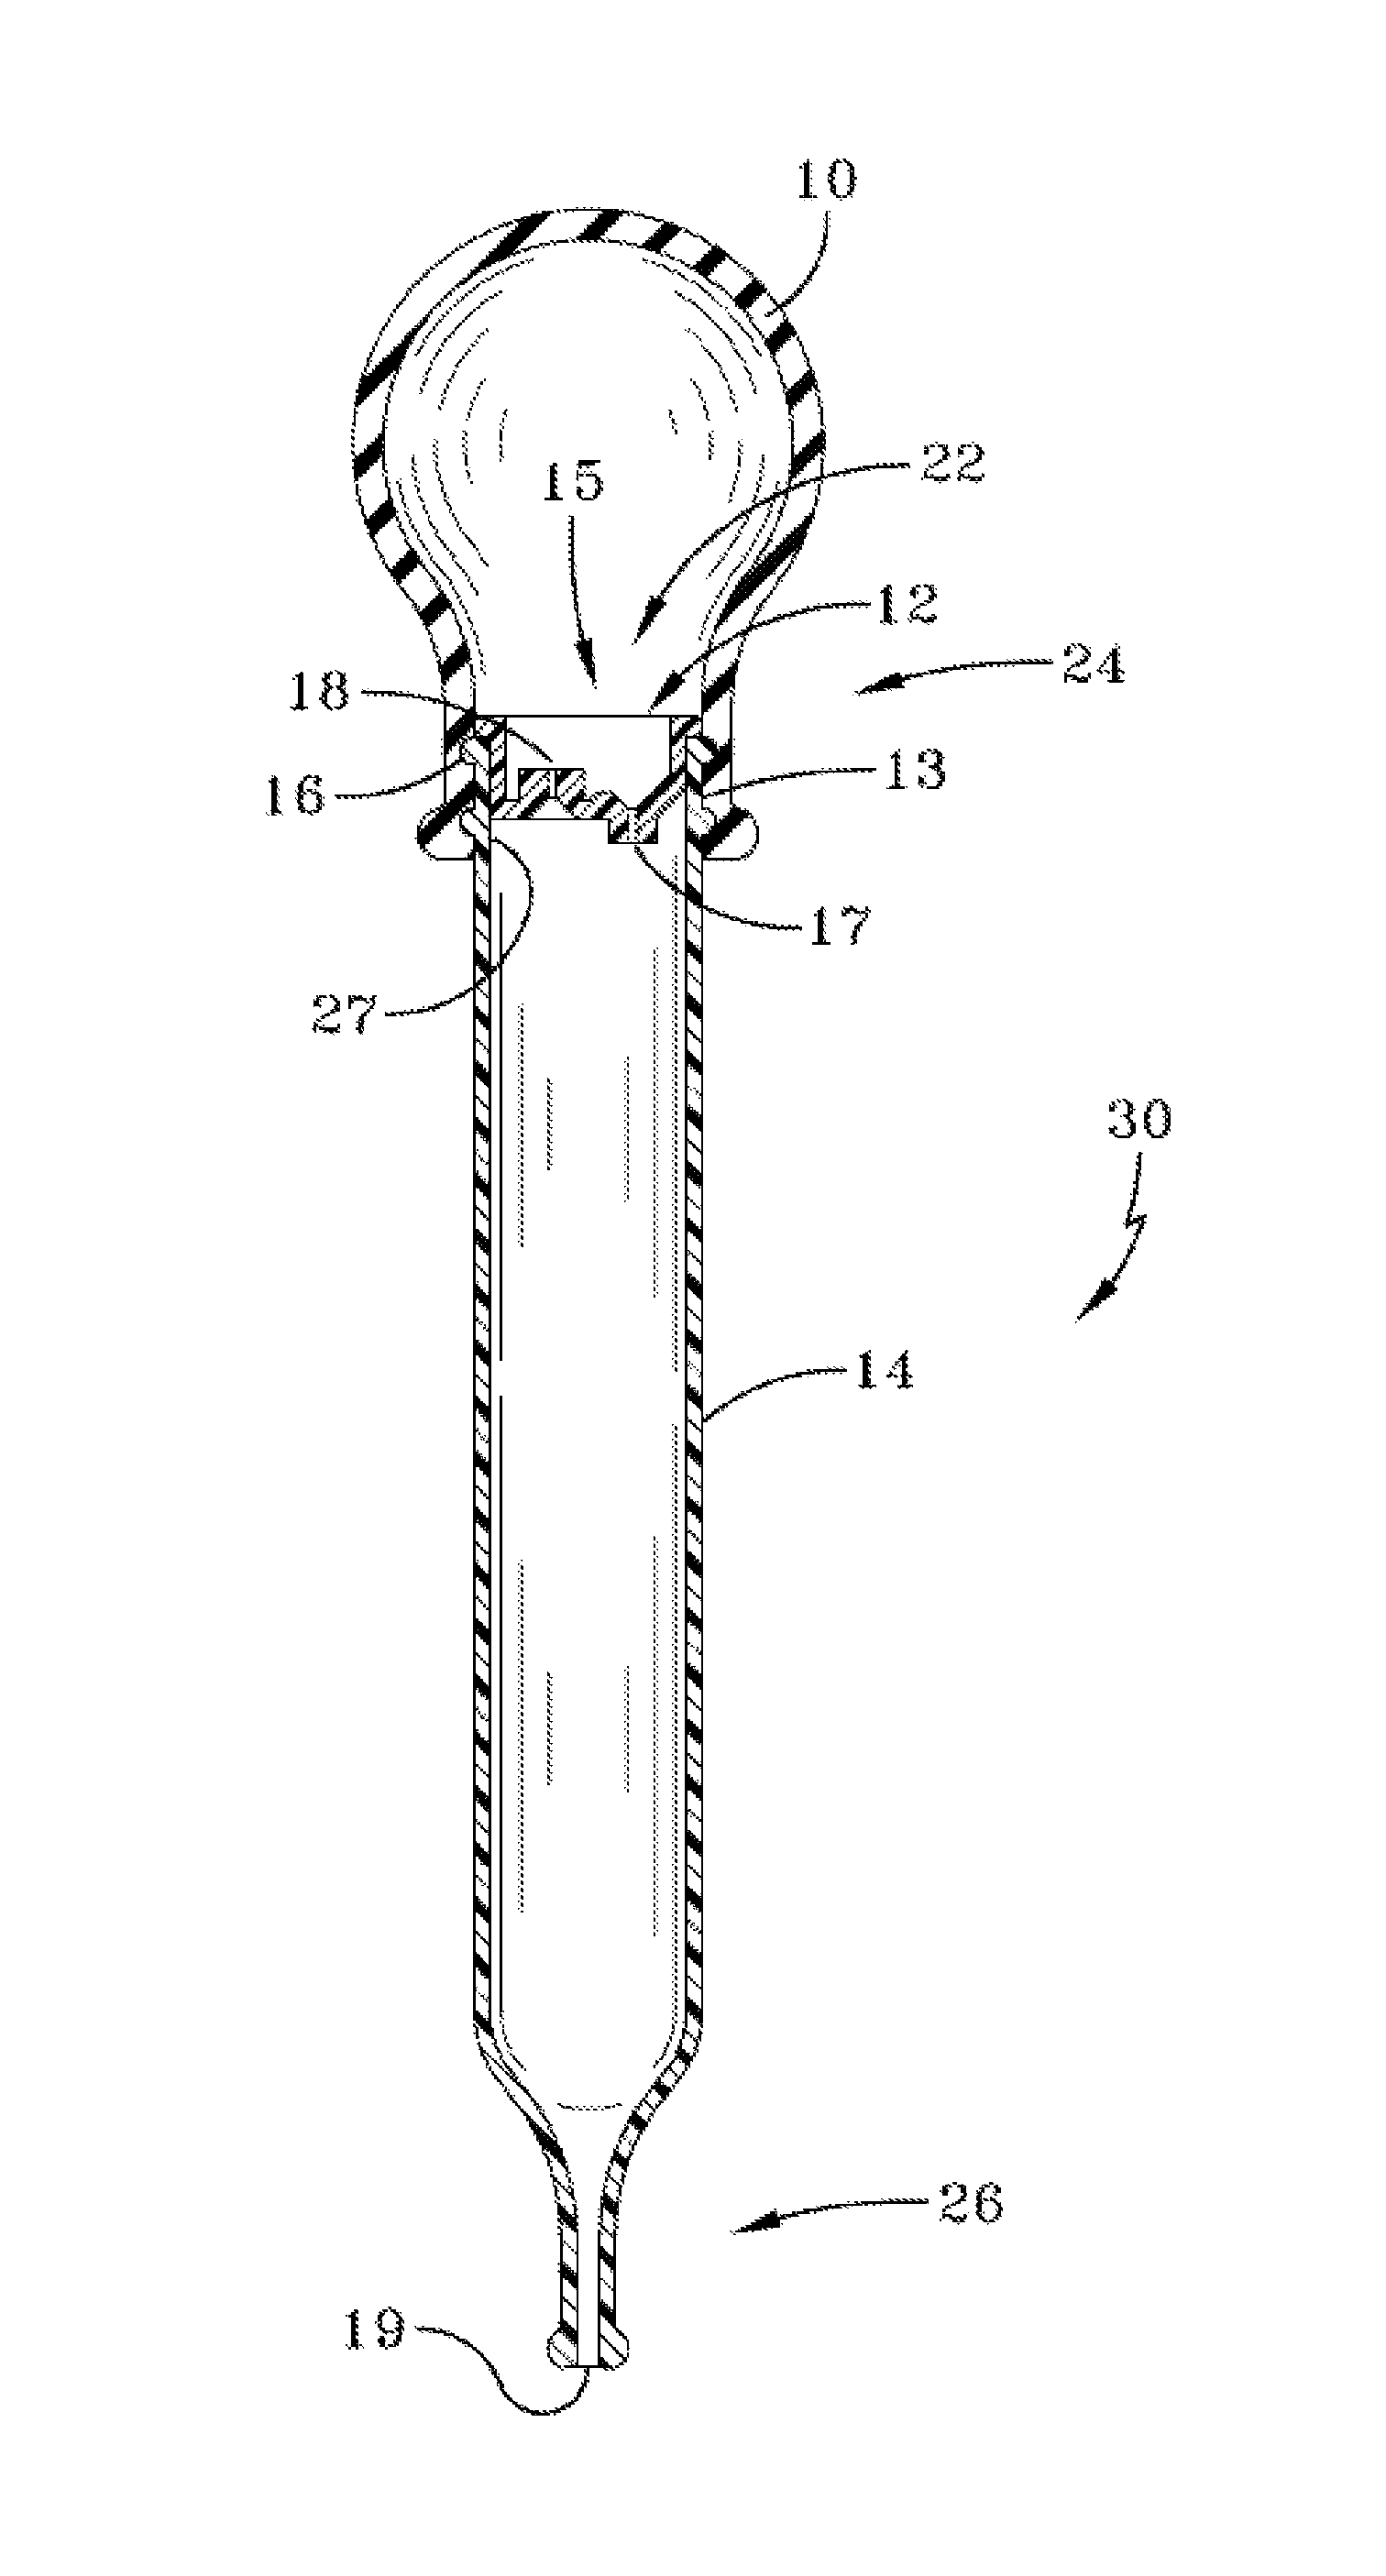 Leak resistant siphoning device for use in fluid transfer